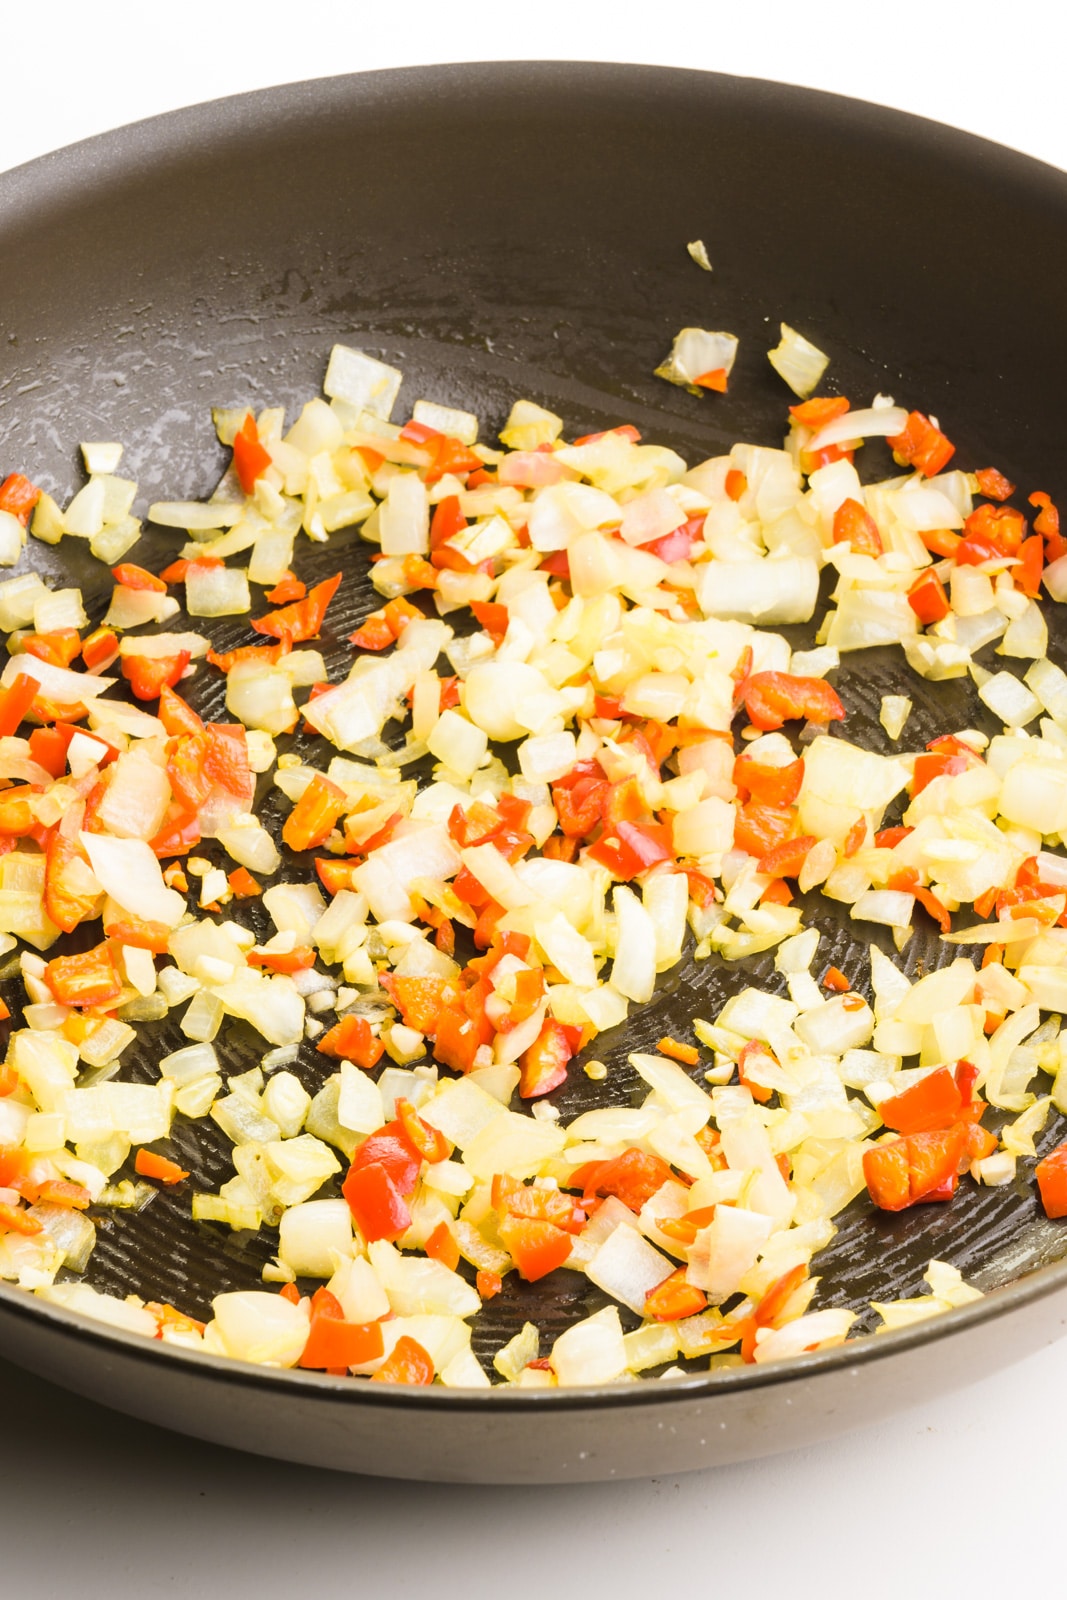 Diced onions and red peppers are in the bottom of a skillet being cooked.